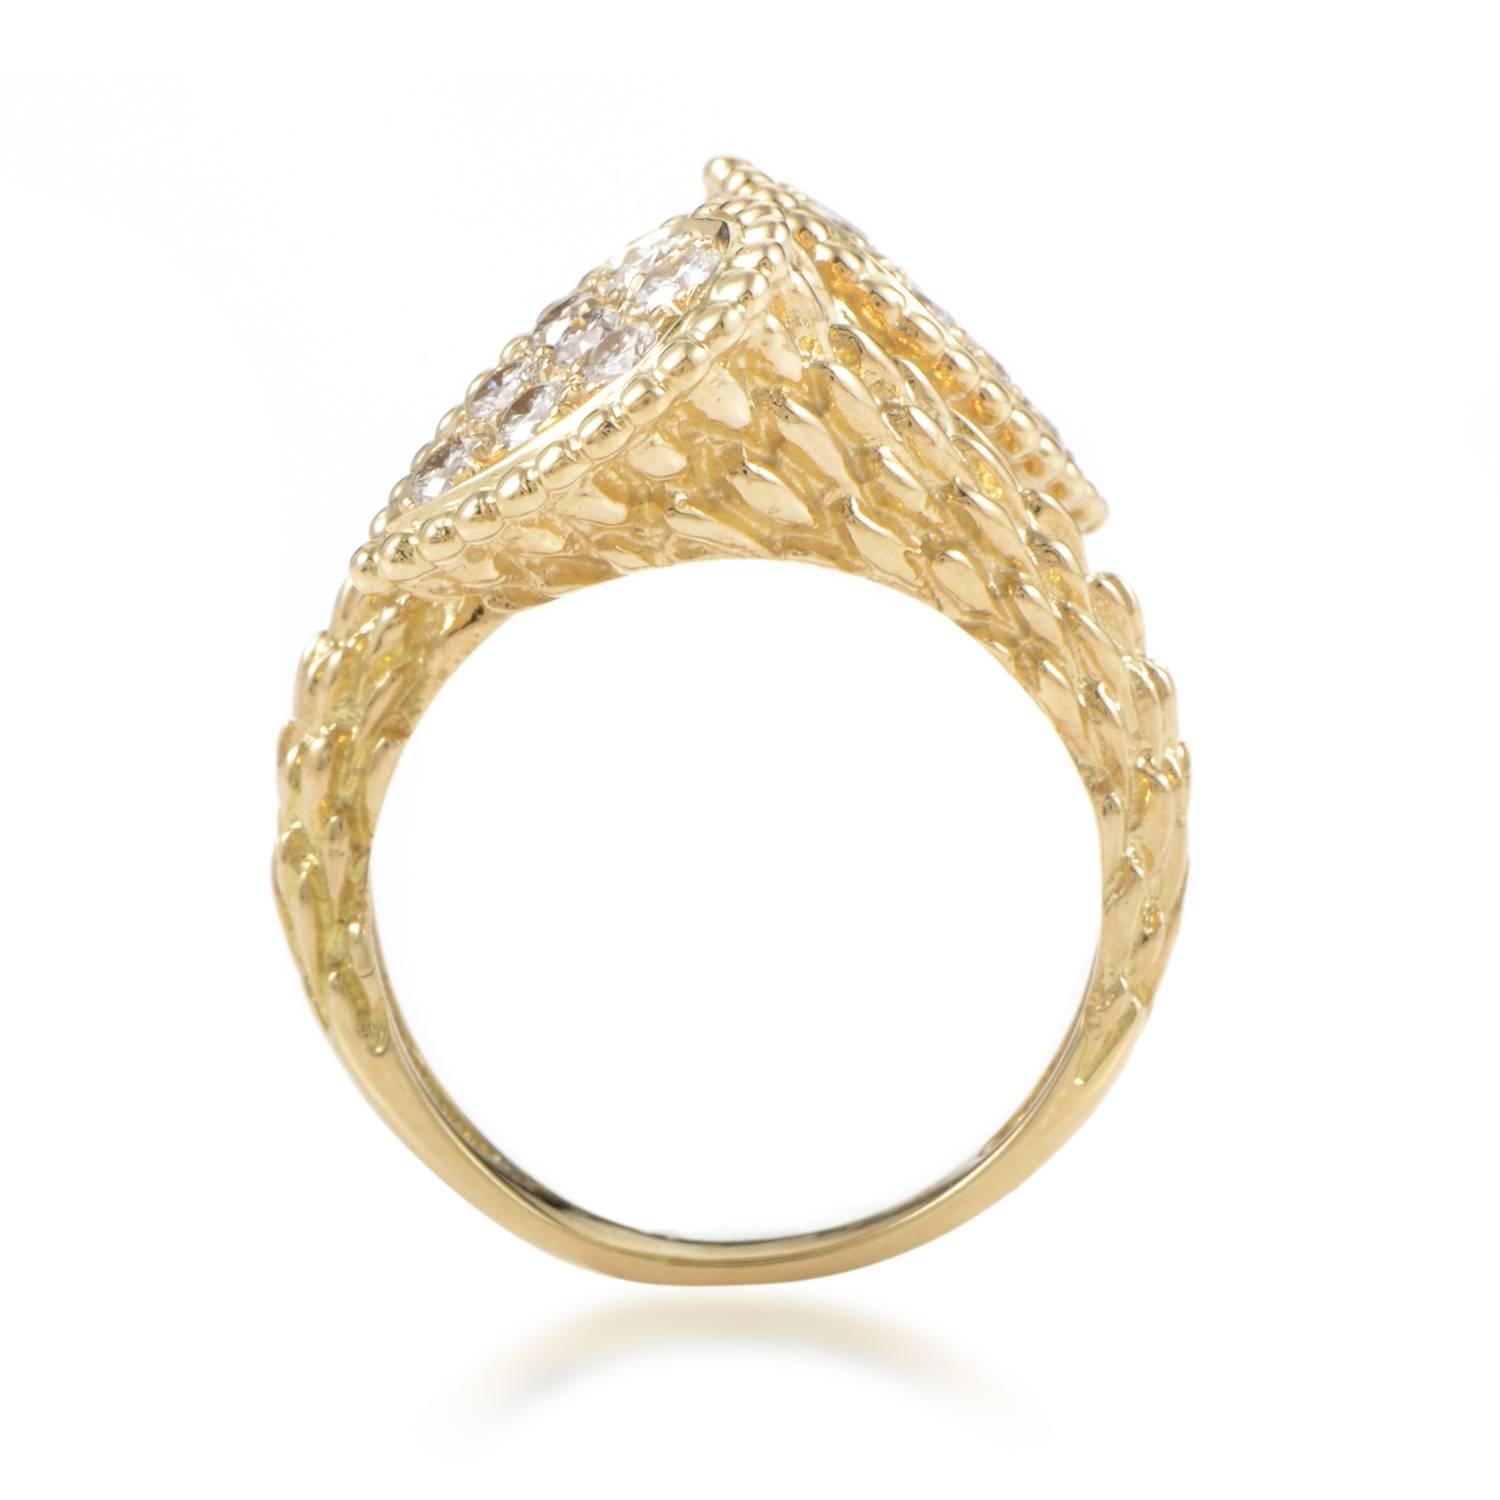 An appealing shape graced with a compelling texture and impeccable finish, this enchanting ring from Boucheron exudes sheer luxurious allure of 18K yellow gold and a scintillating glow of diamonds totaling 0.66ct.
Included Items: Manufacturer's